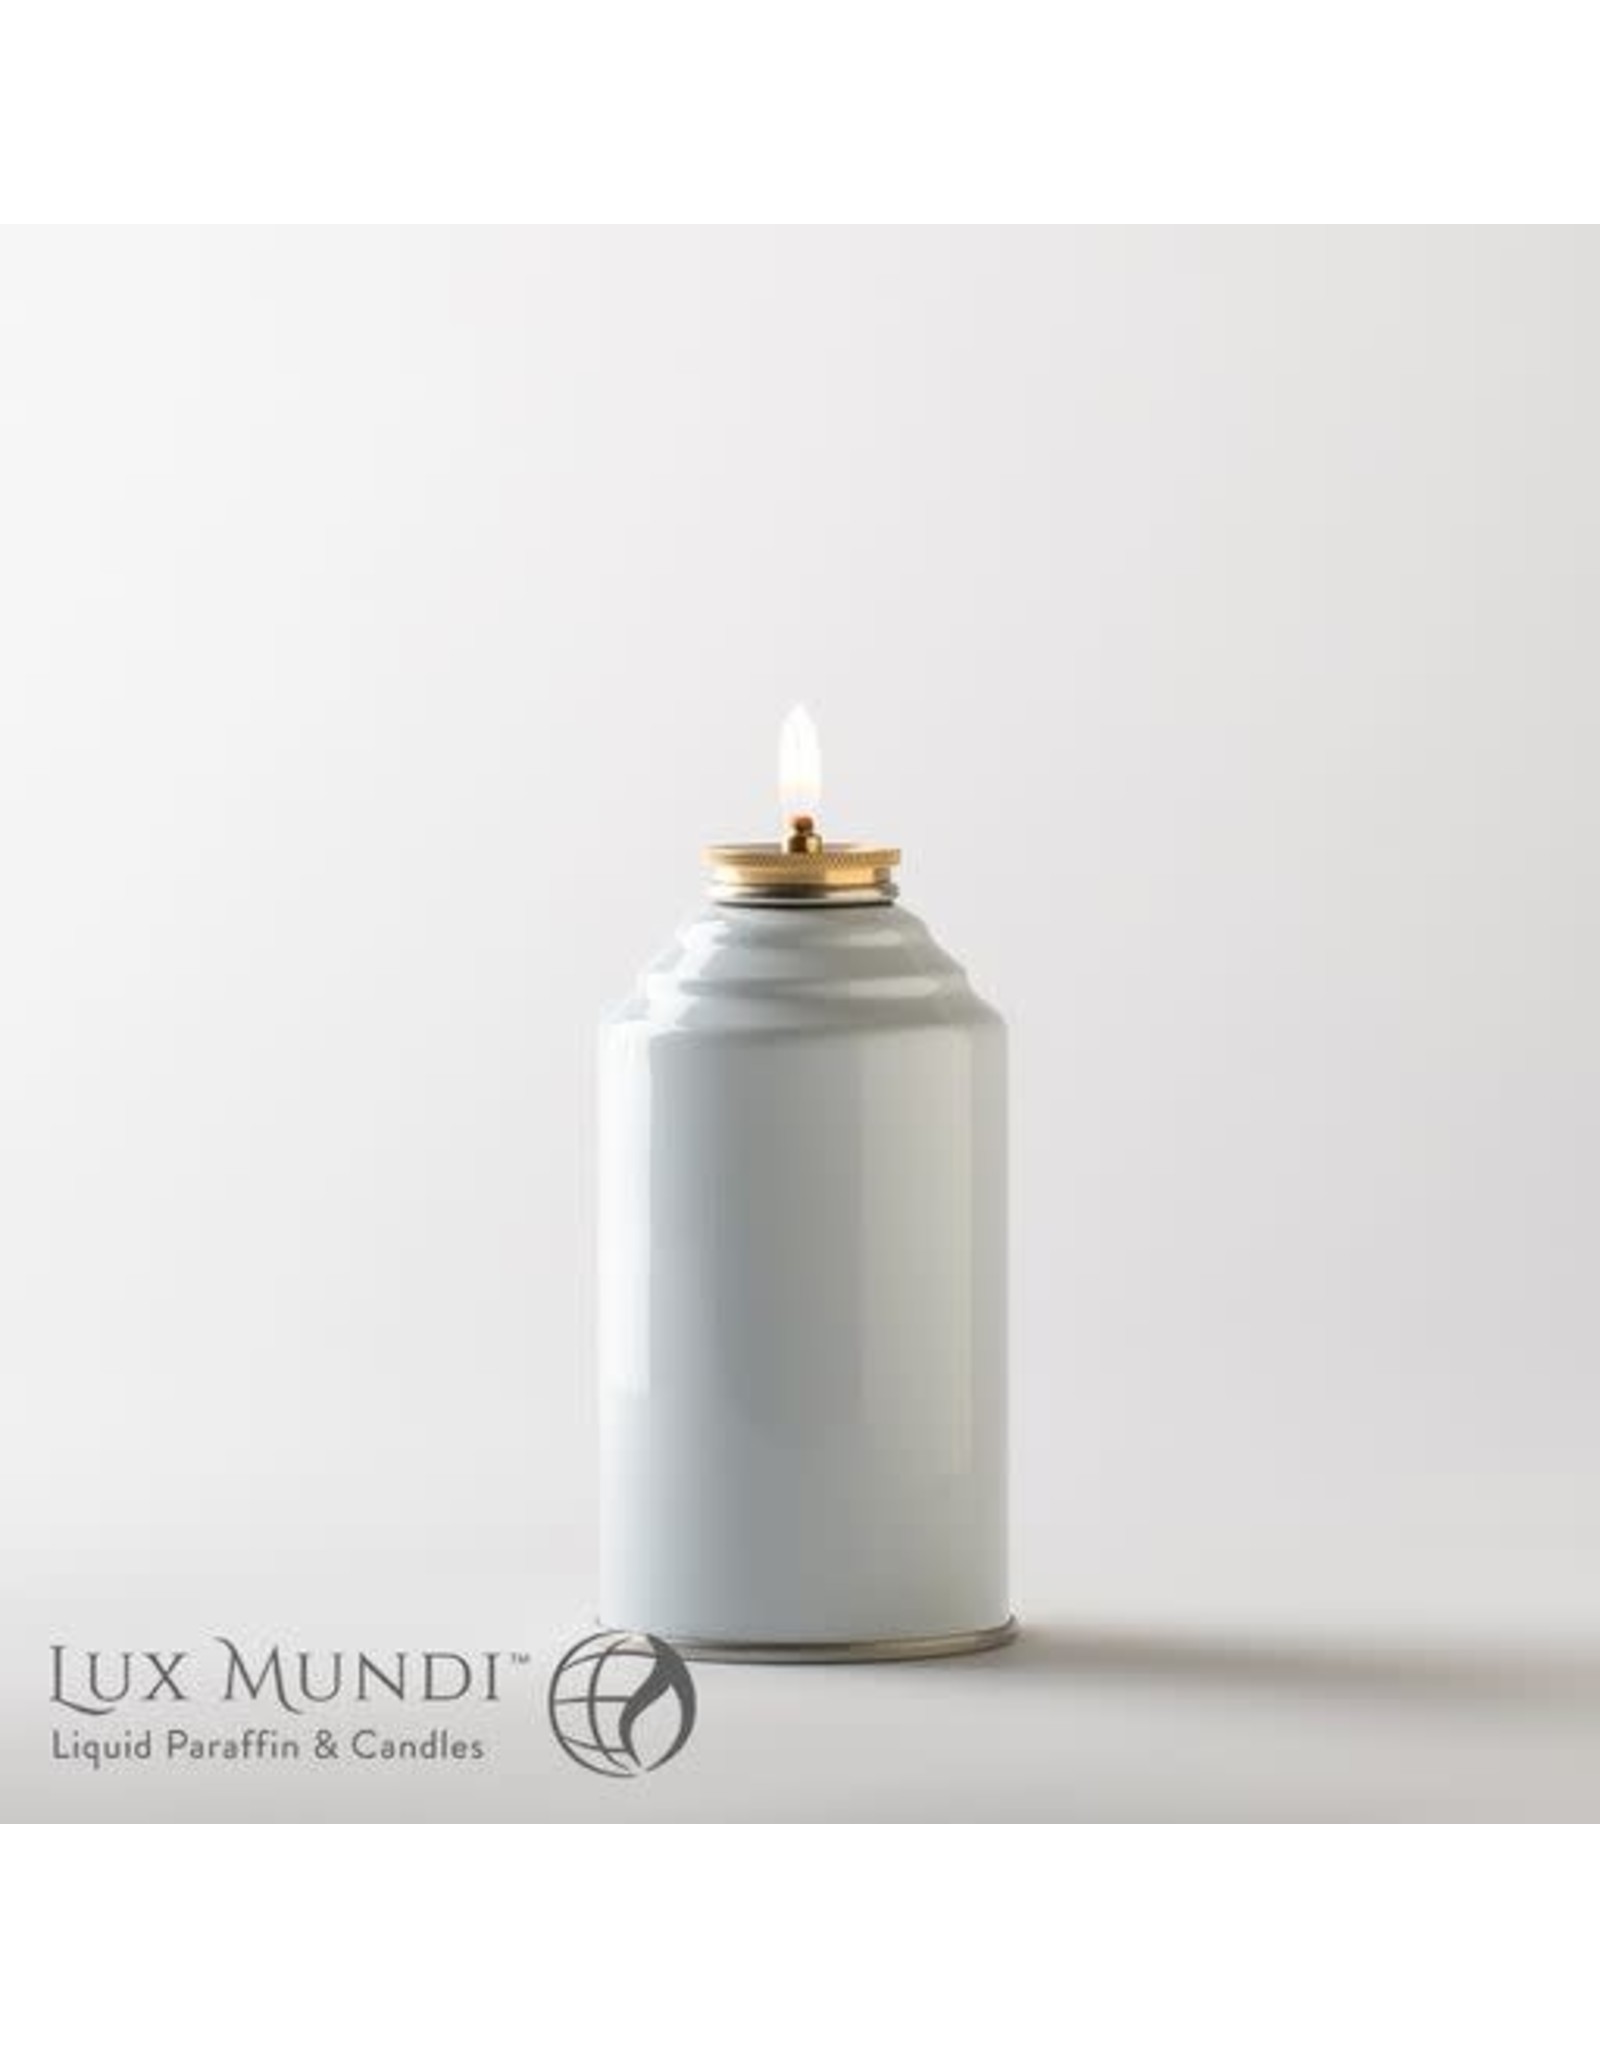 Lux Mundi Refillable Oil Container 70-hour